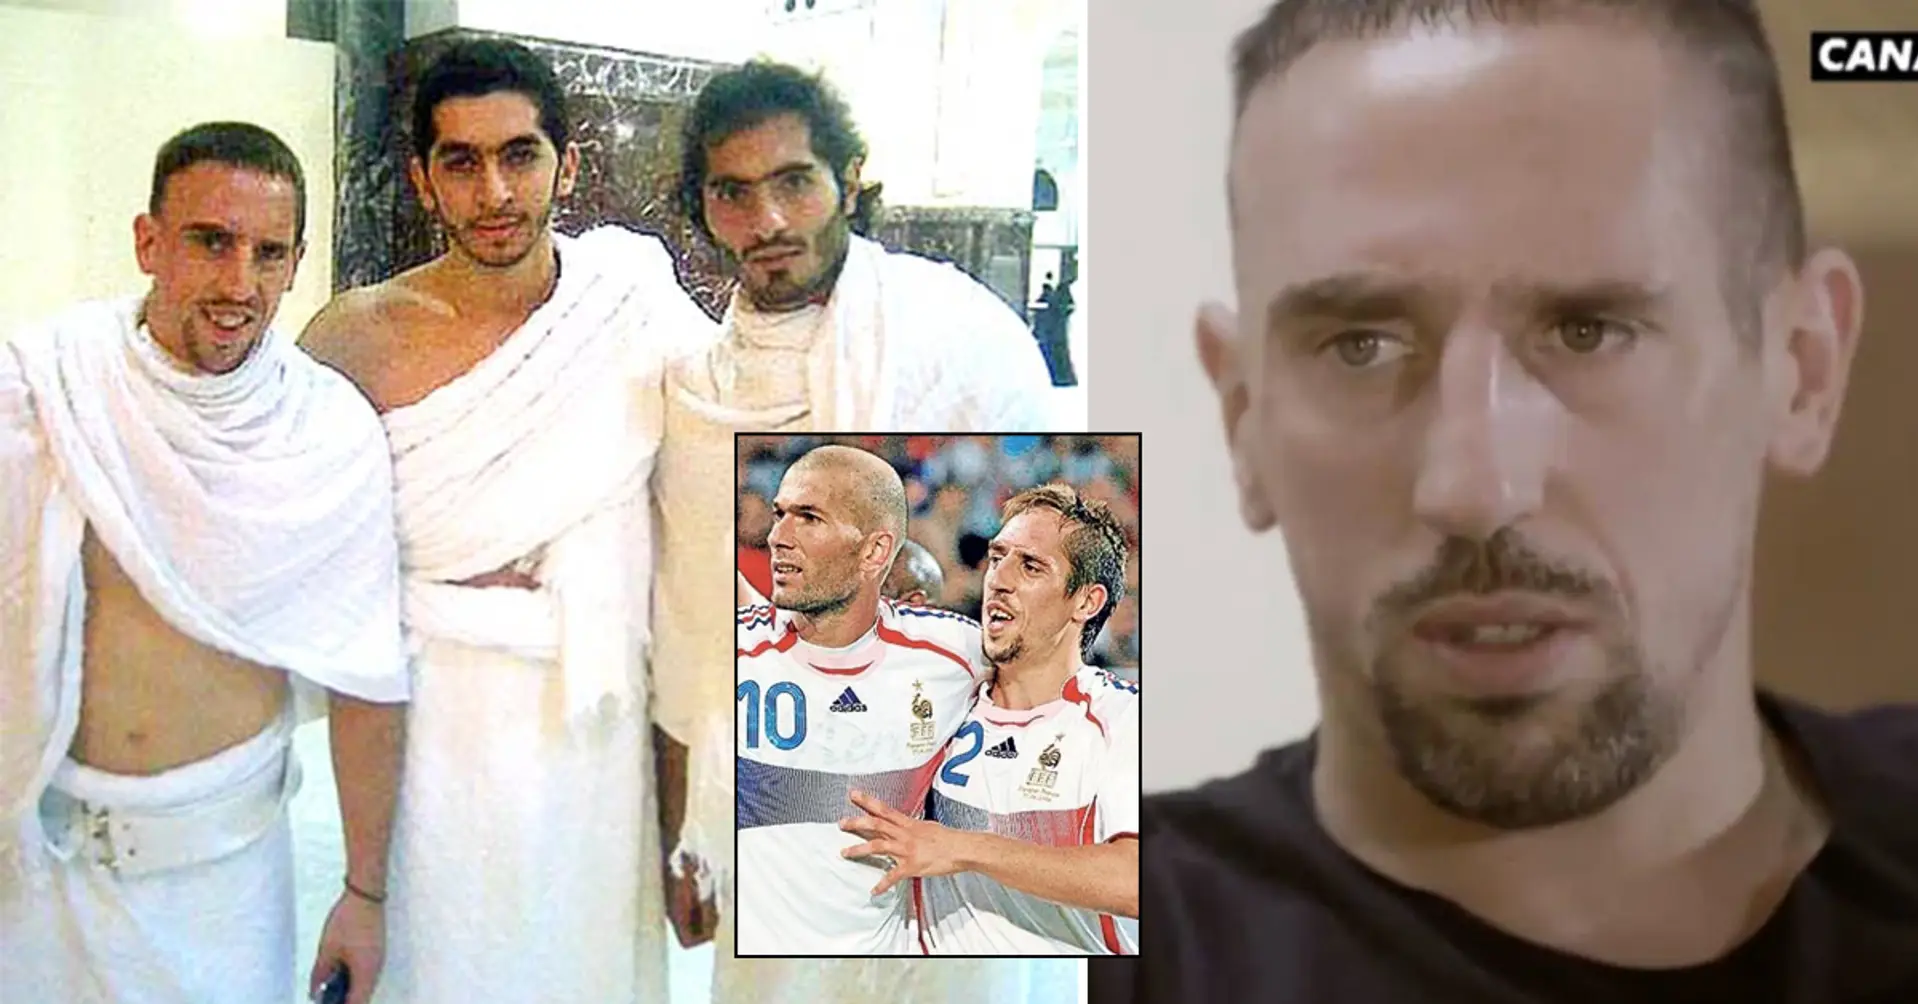 ‘I became stronger’. Reason why France star Franck Ribery converted from Christianity to Islam